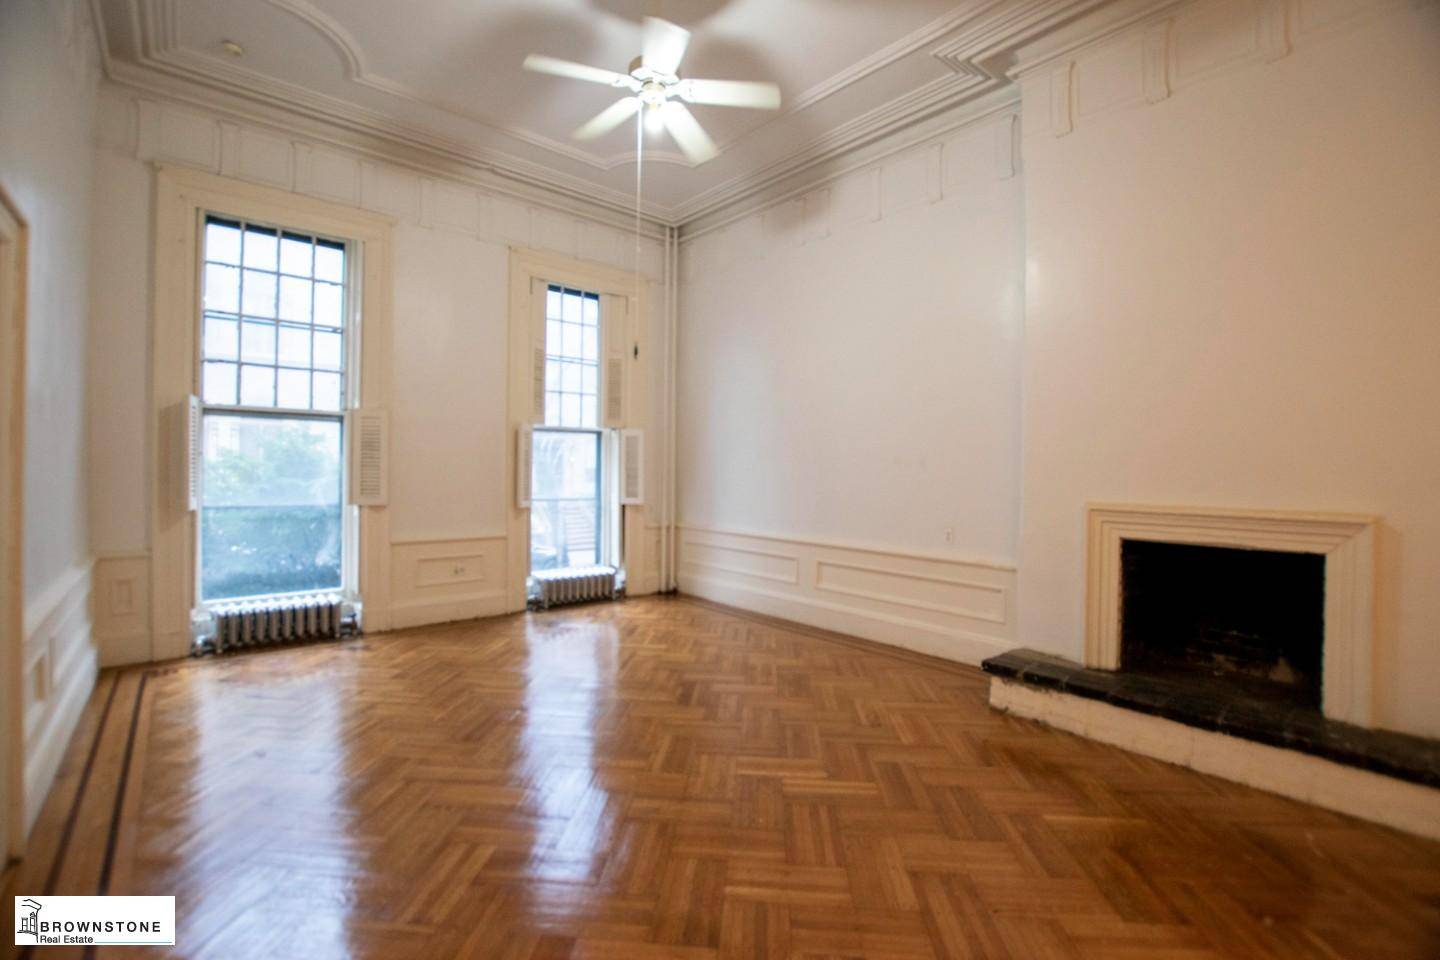 Light filled one bedroom in beautiful Brooklyn Heights, large living room, open kitchen, full bath.